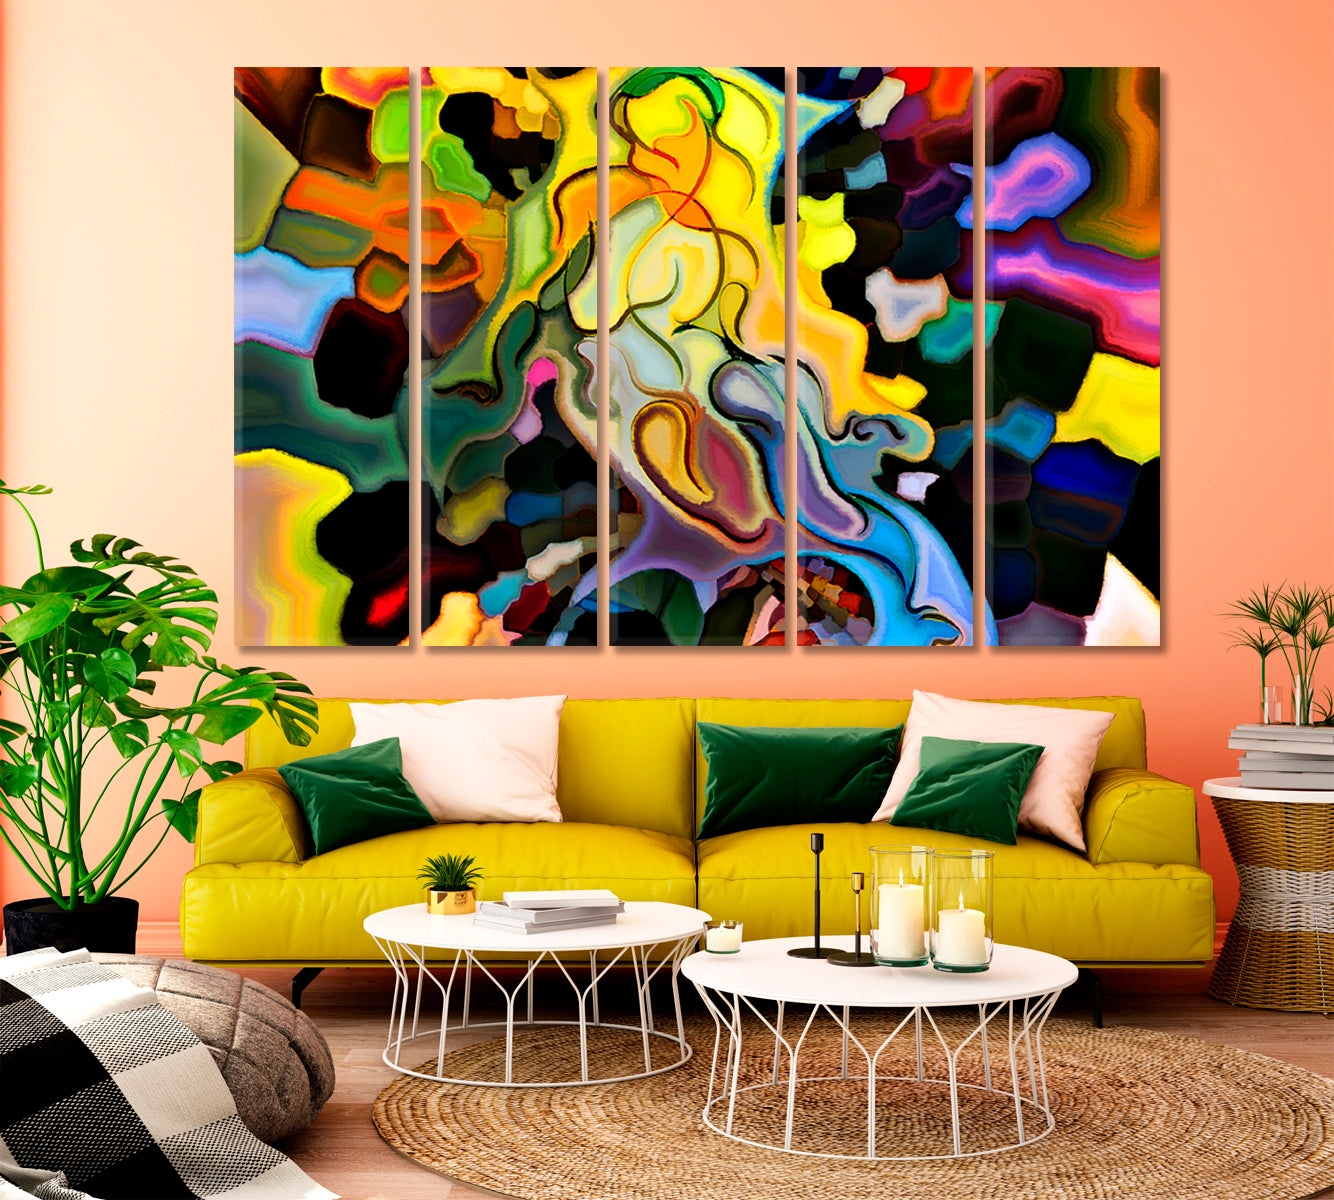 Human and Geometric Forms Collection Abstract Creativity and Imagination Abstract Art Print Artesty 5 panels 36" x 24" 